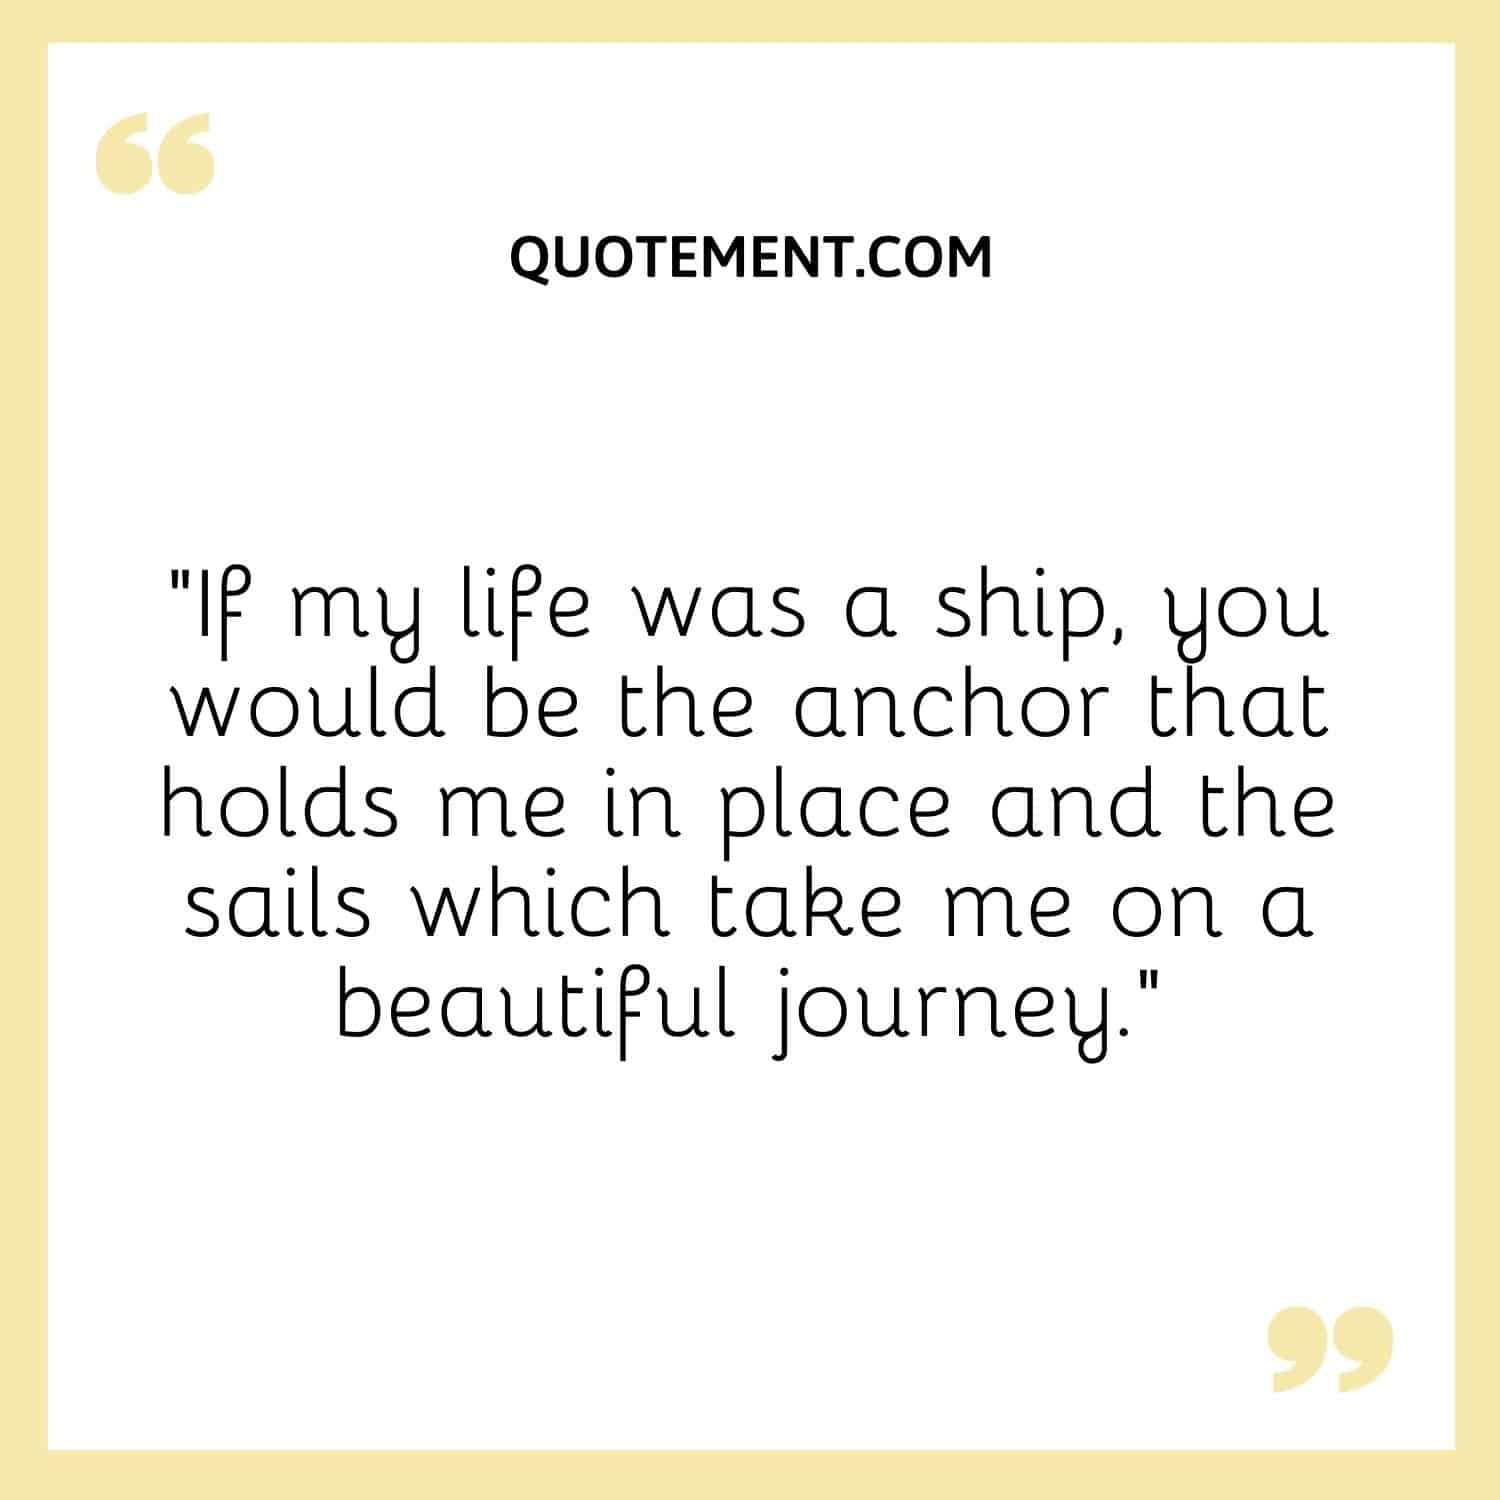 “If my life was a ship, you would be the anchor that holds me in place and the sails which take me on a beautiful journey.”